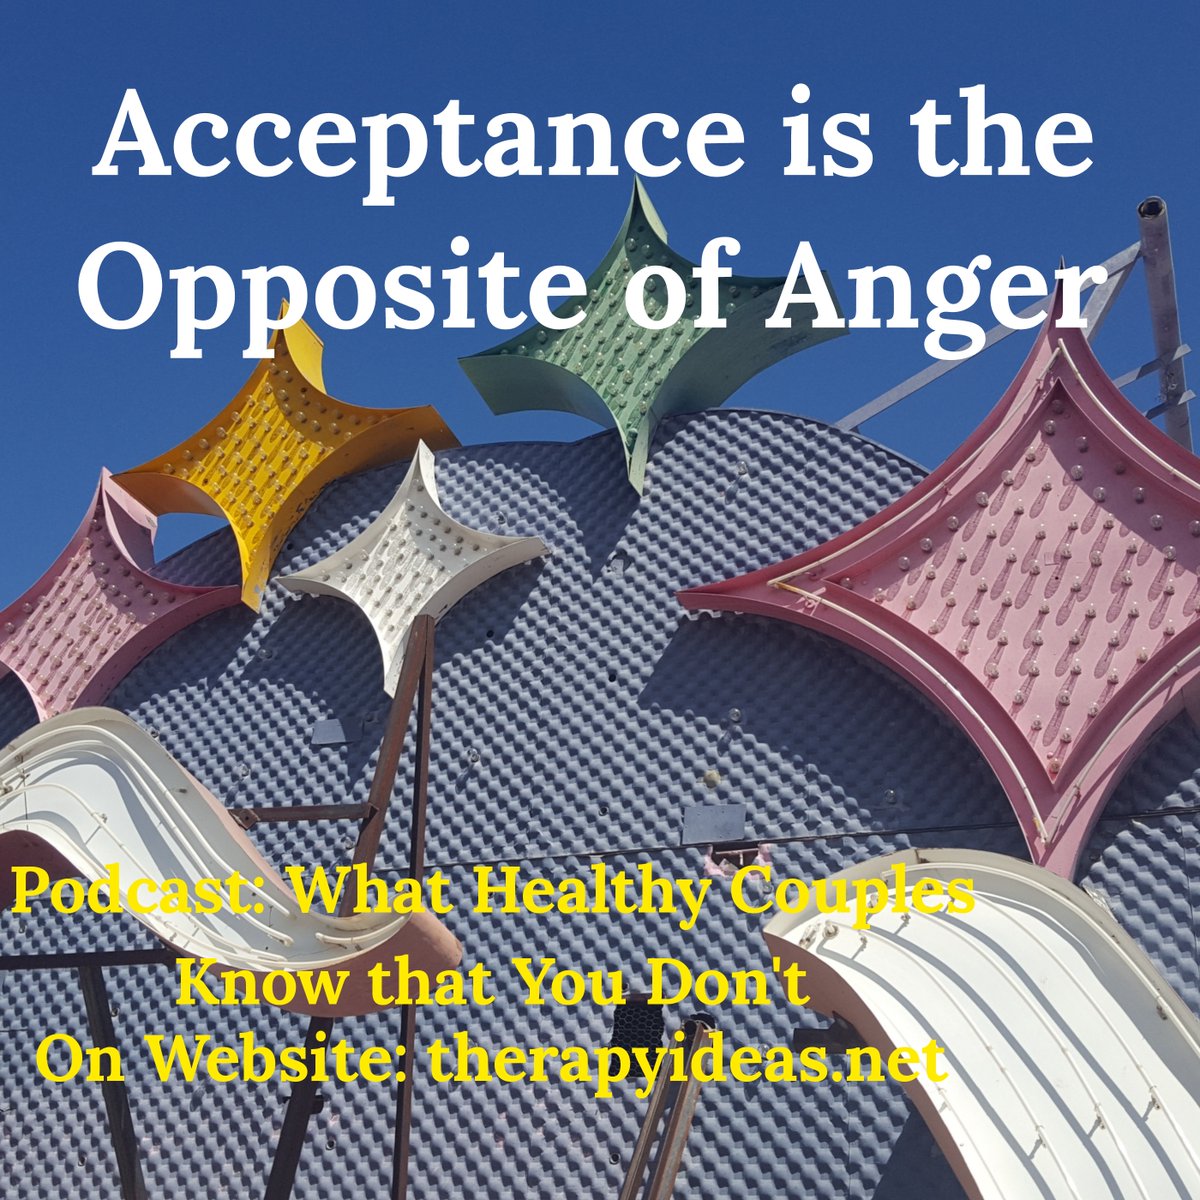 #angermanagement #angerissues  free info @ therapyideas.net  Listen to: What Healthy Couples Know That You Don't Now an APP!